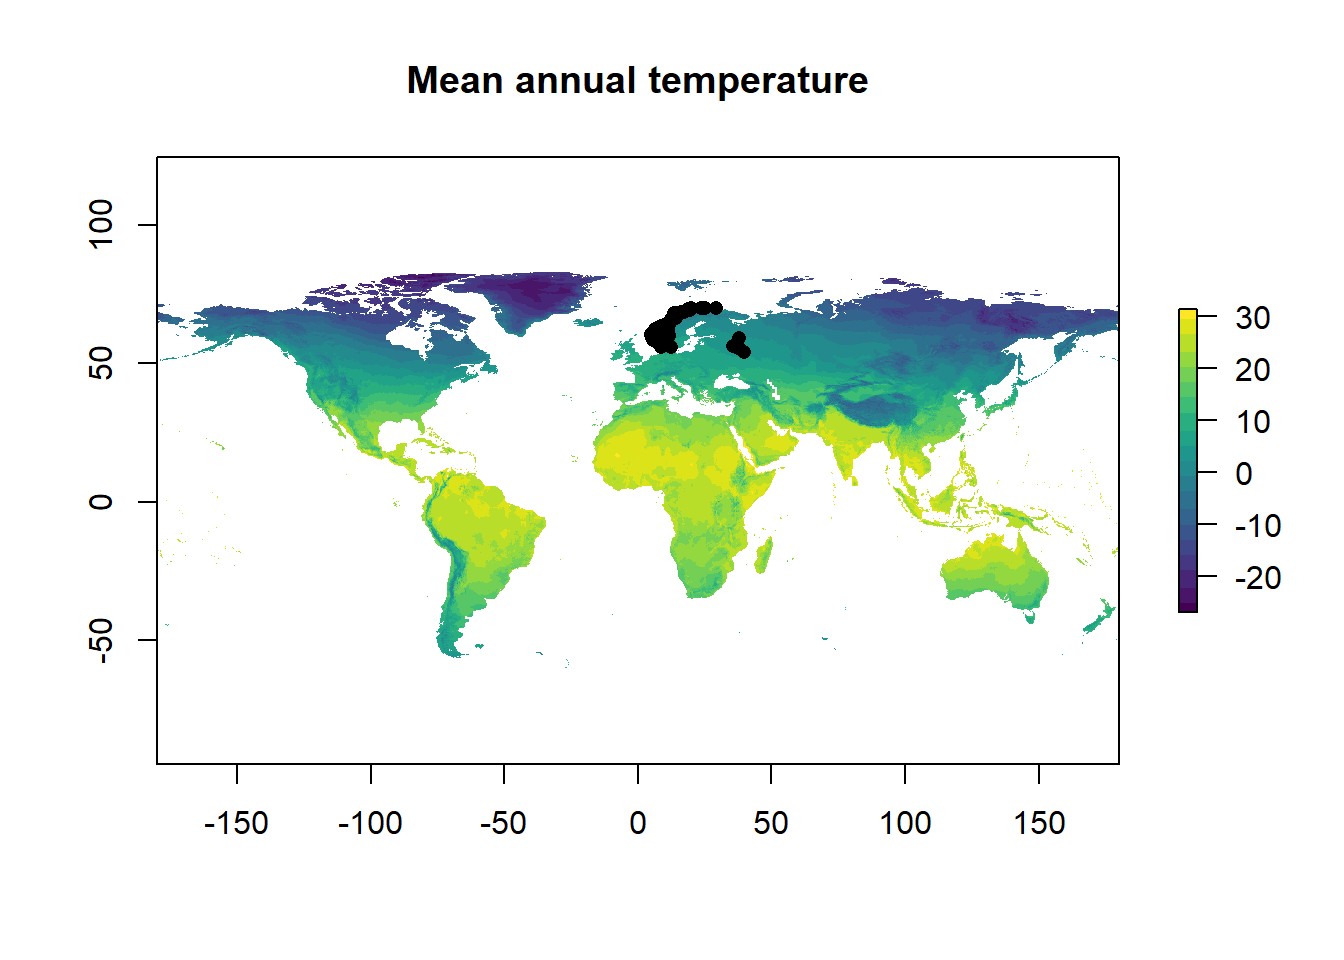 The distribution of sparrows with mean annual temperature